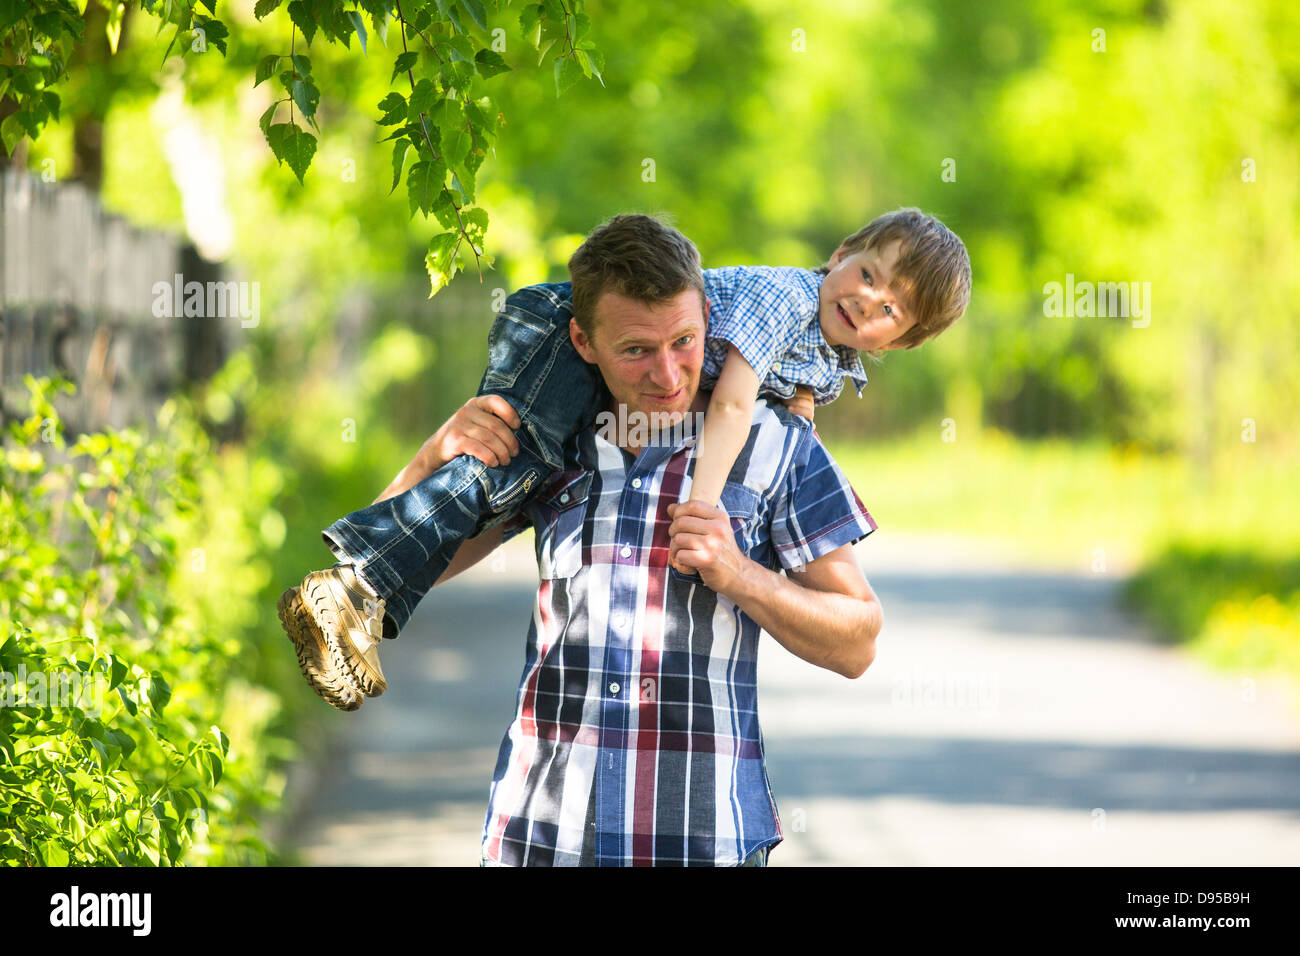 Father and son playing in the park Stock Photo